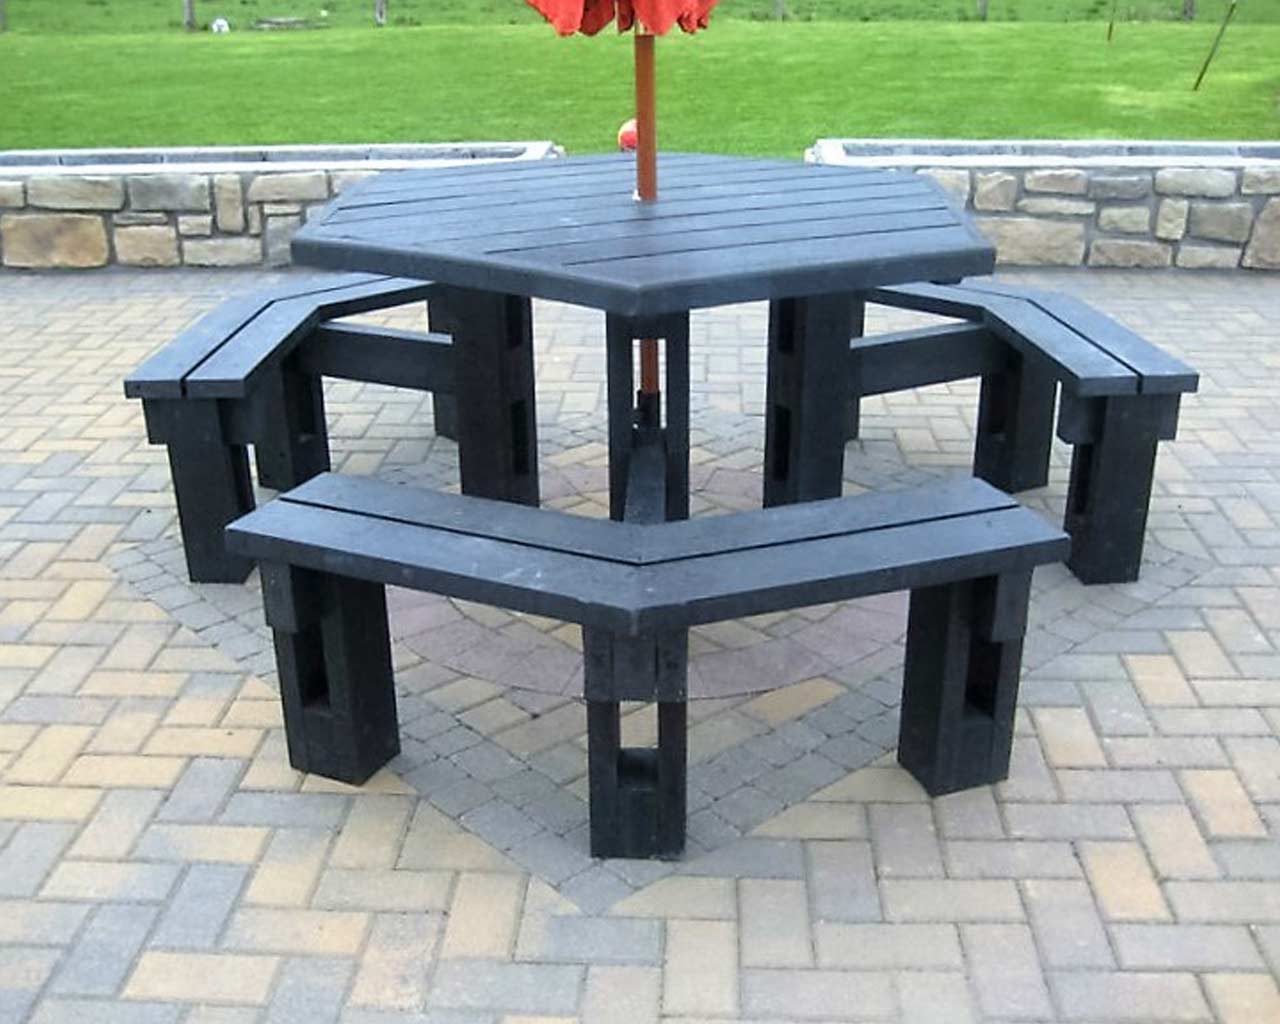 6 sided picnic table without back